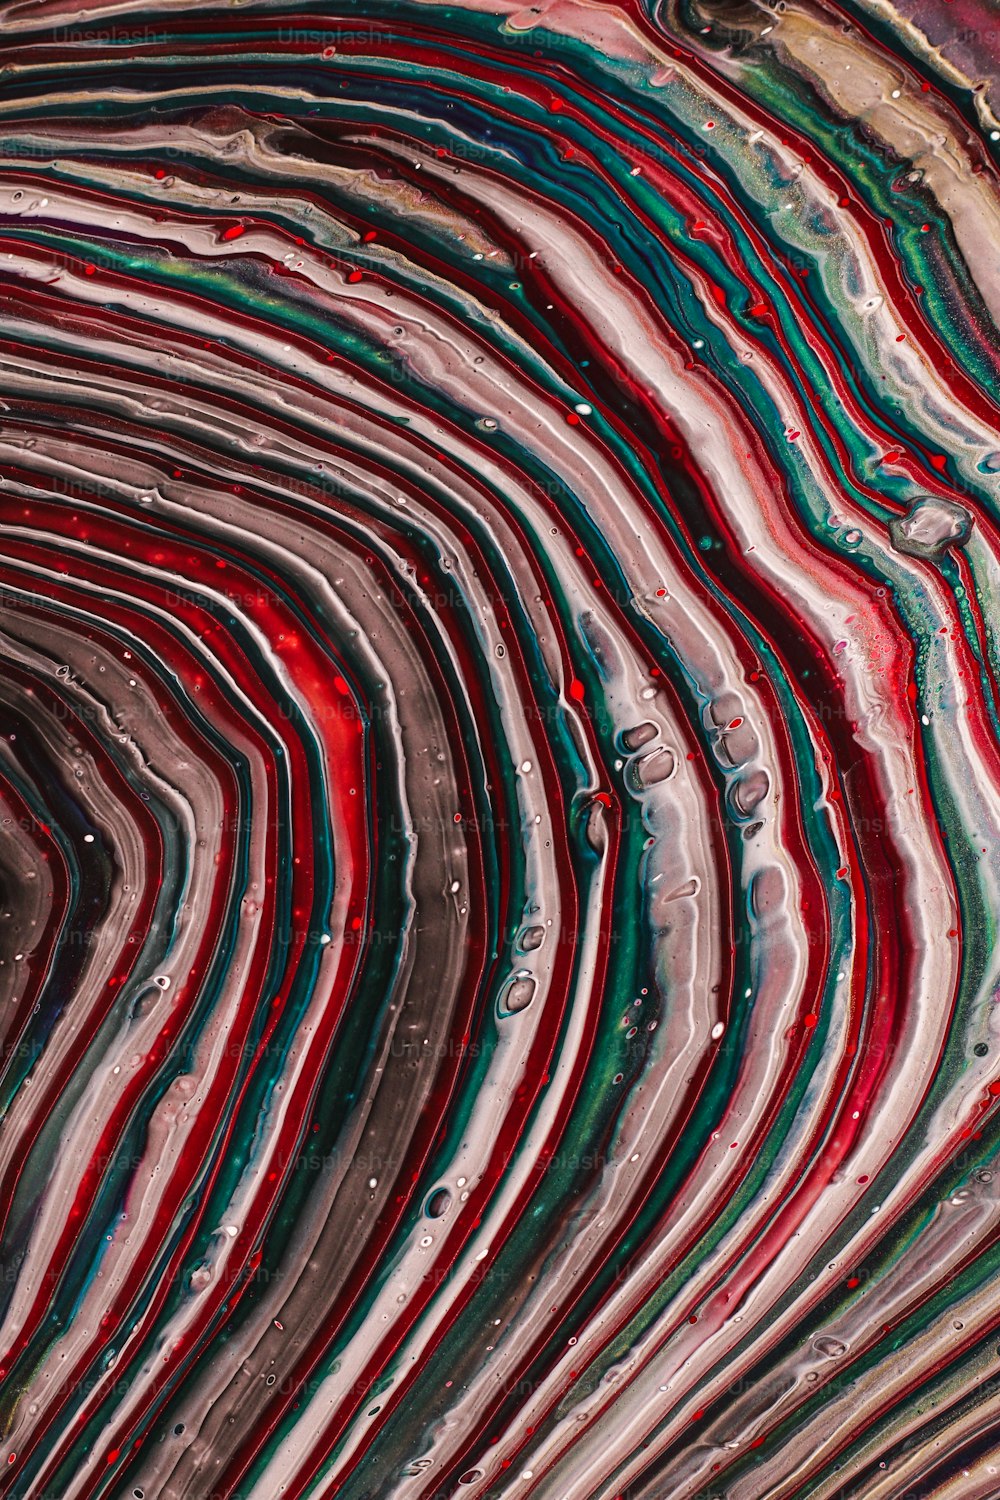 a close up view of a red, green, and blue swirl